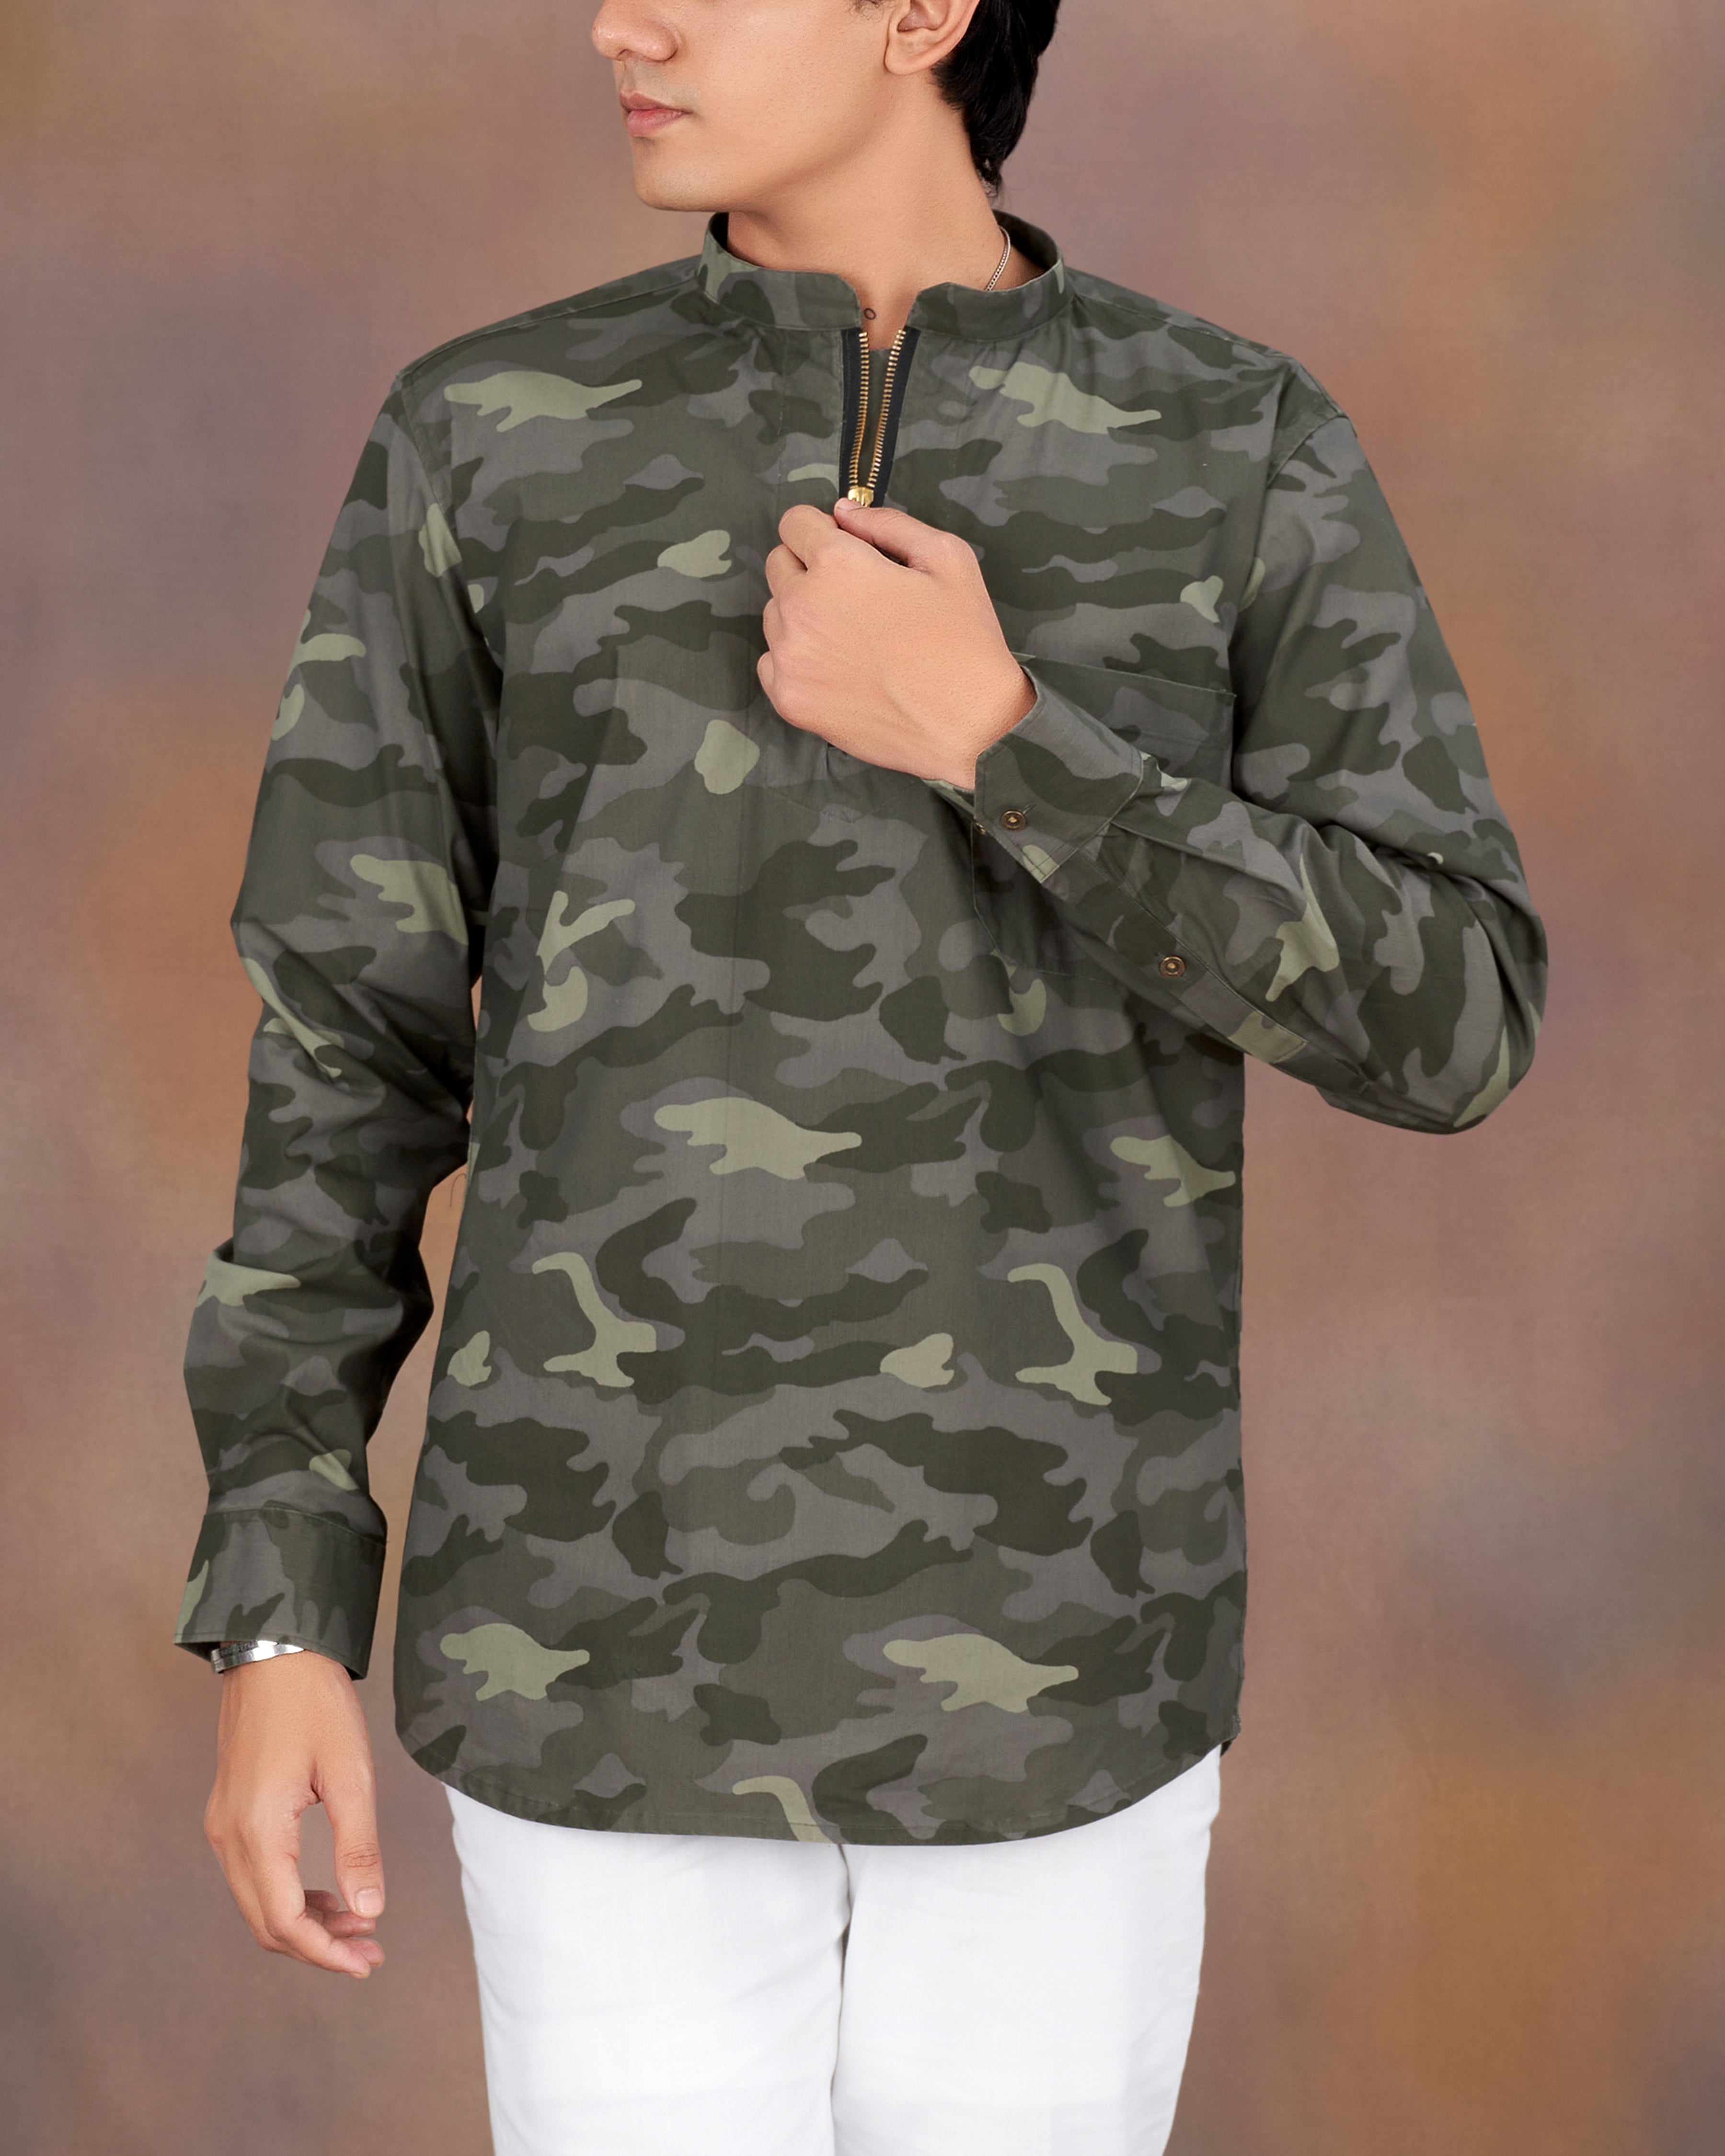 Birch Green with Wenge Gray Camouflage Printed Royal Oxford Designer zipper Shirt